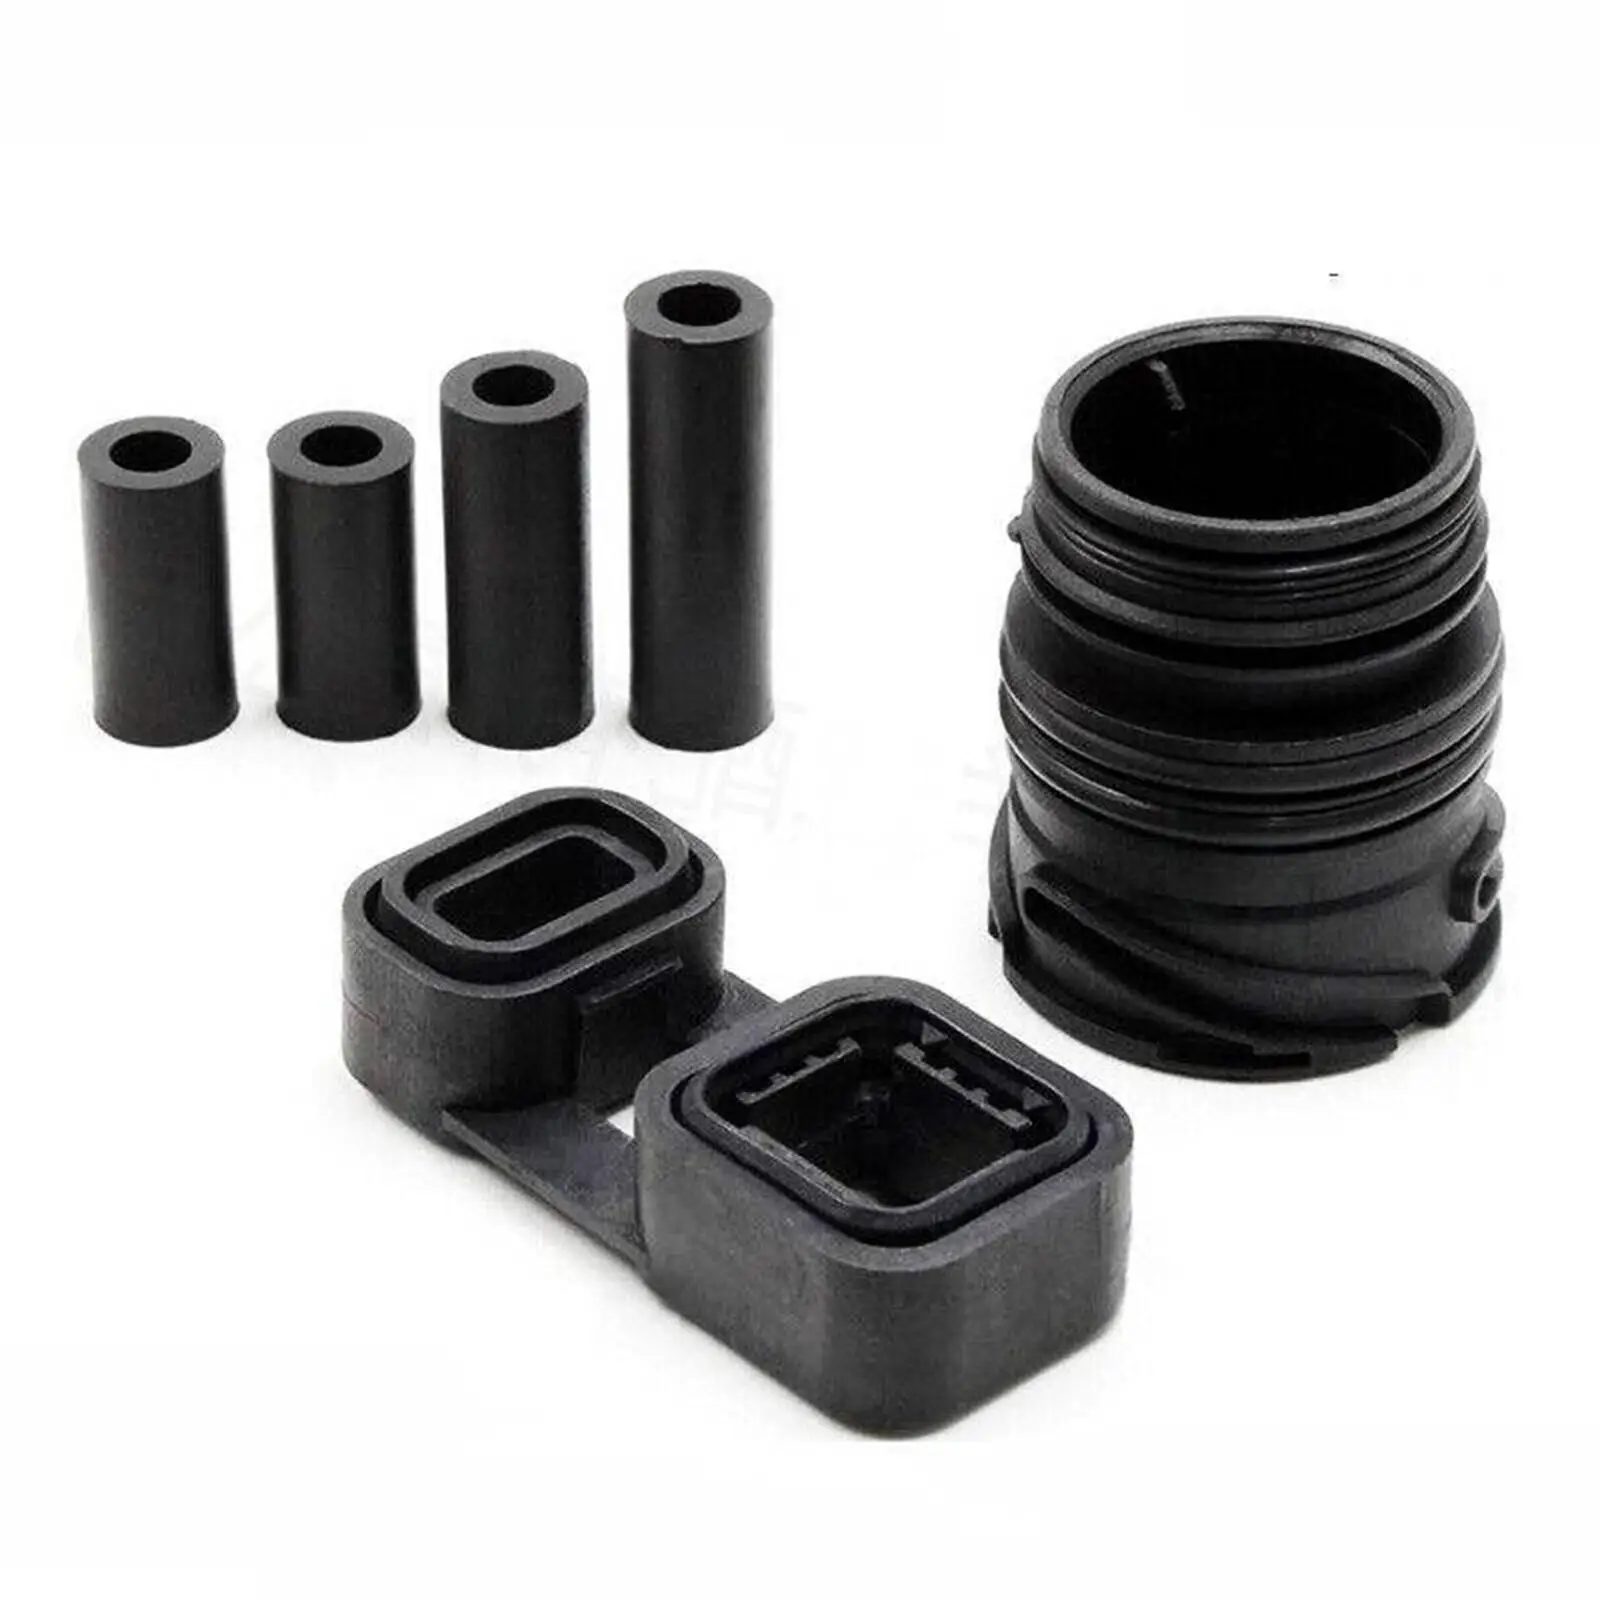 Valve Body Sleeve Connector Seal Kit Car Accessories for BMW 1 Series x1, x3, x5, Z4, Zf Models with 6 Speed Zf 6HP26 6HP28